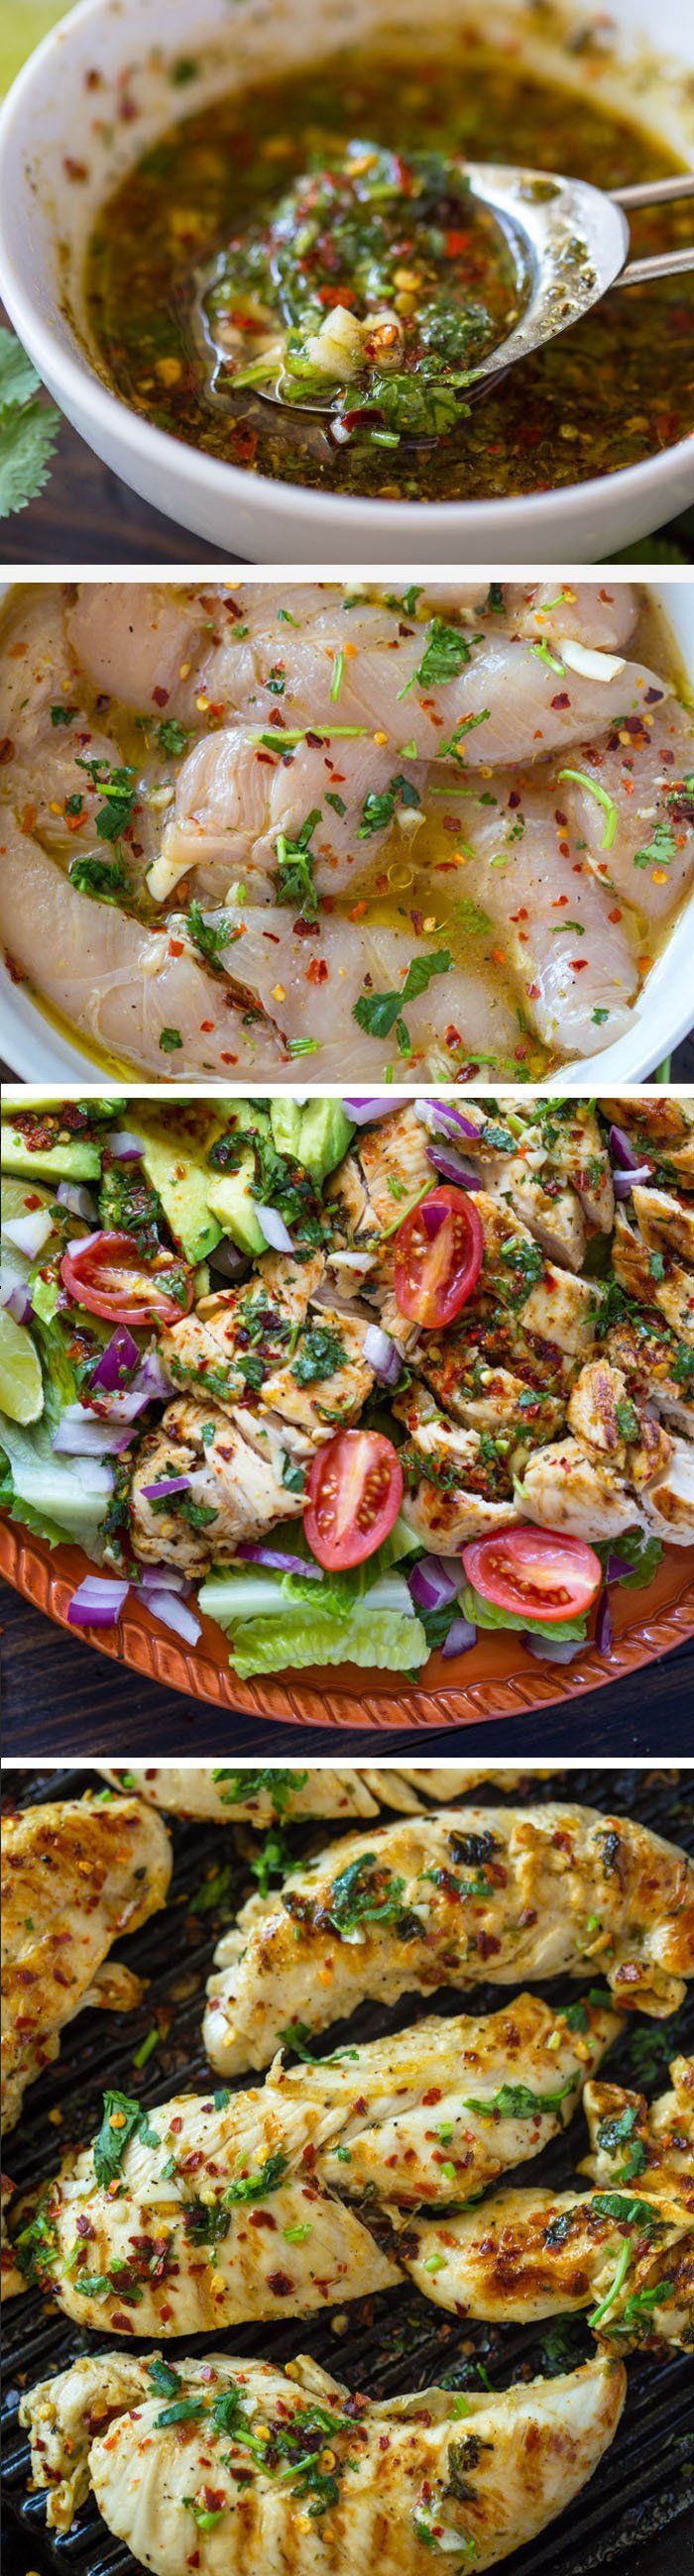 Easy Chili Cilantro Lime Chicken is salty, sweet, sour, and spicy and is great on salads, with rice, or in burritos and wraps!